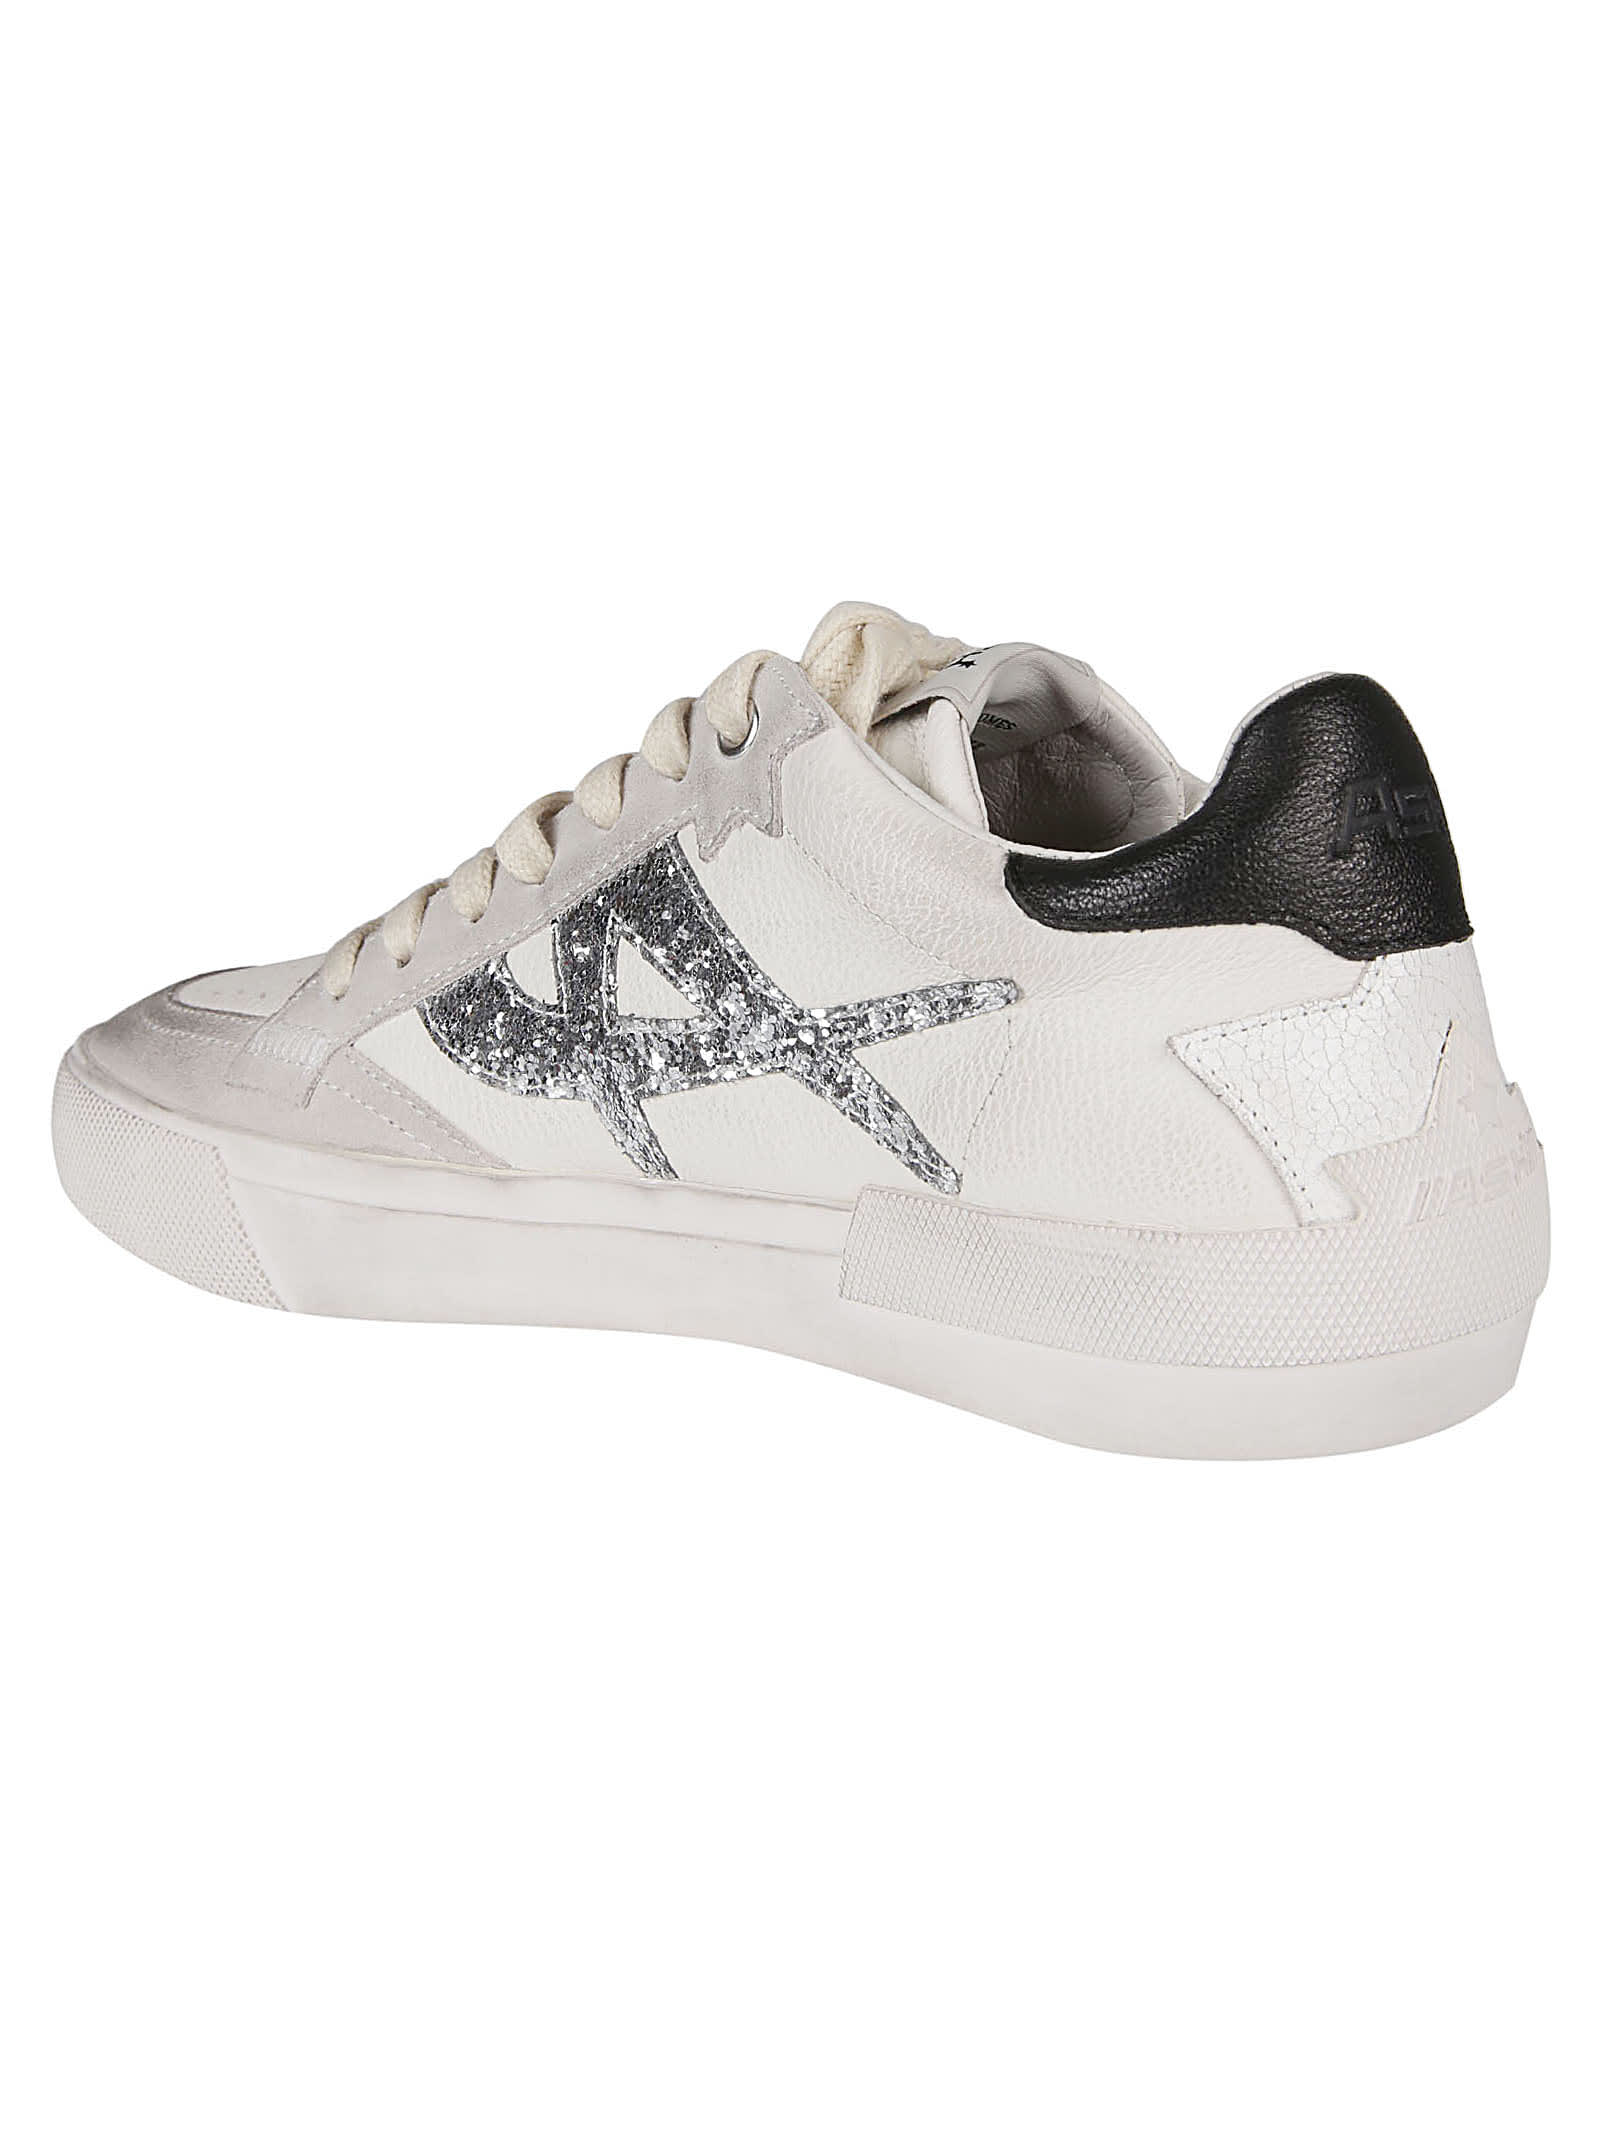 Shop Ash Moonlight Sneakers In White/silver/black